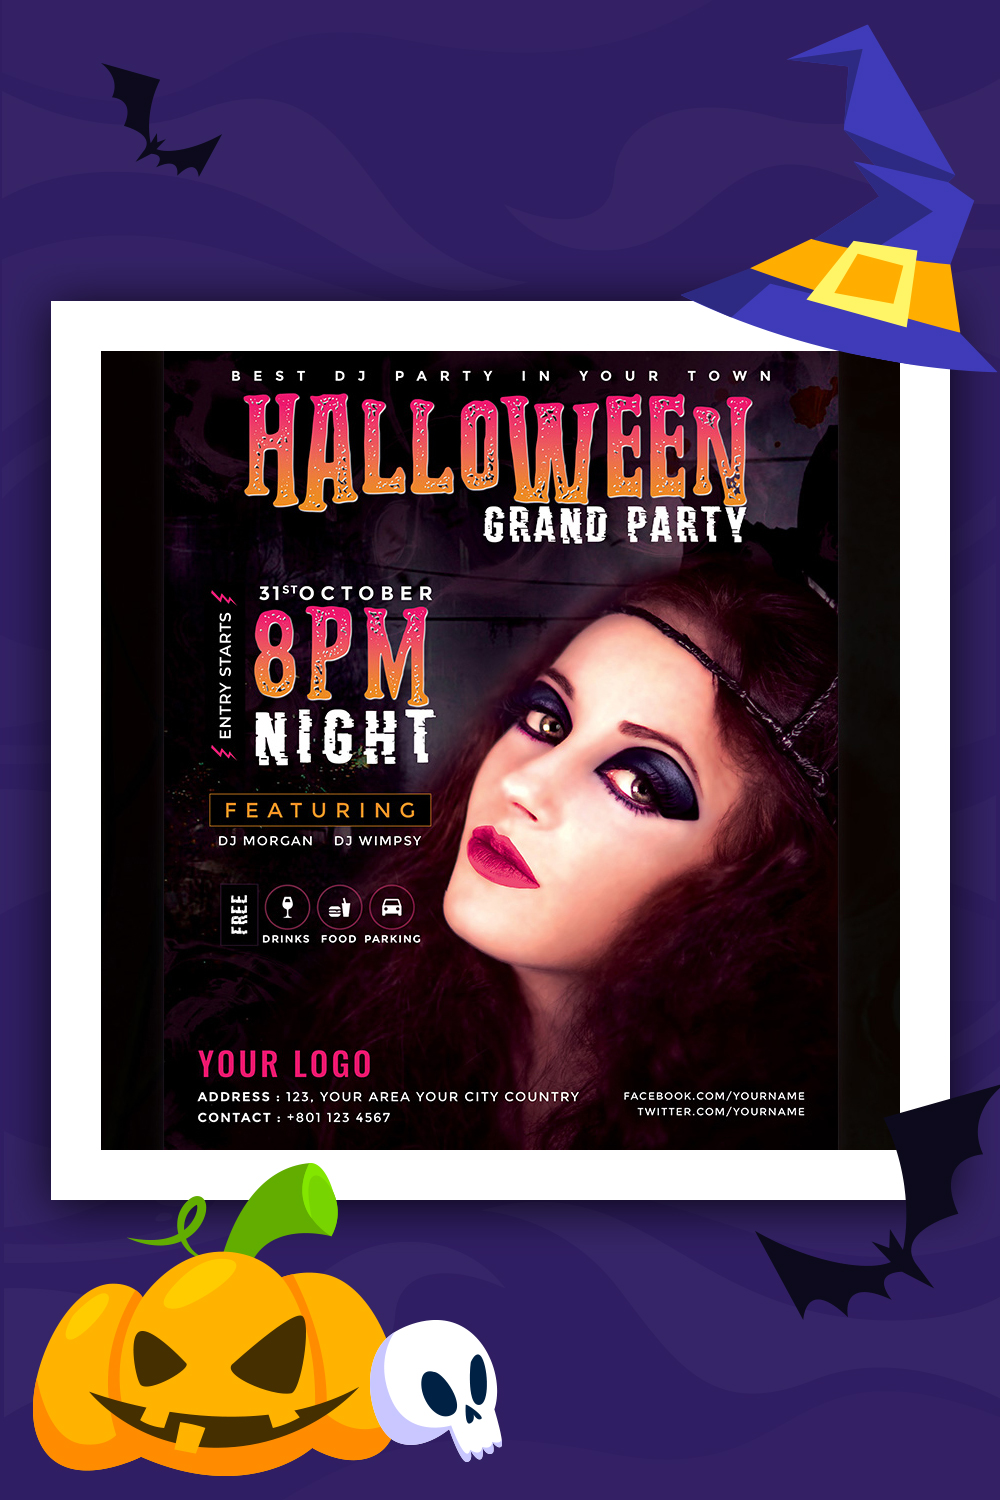 Halloween Grand Party Flyer Corporate Identity Template